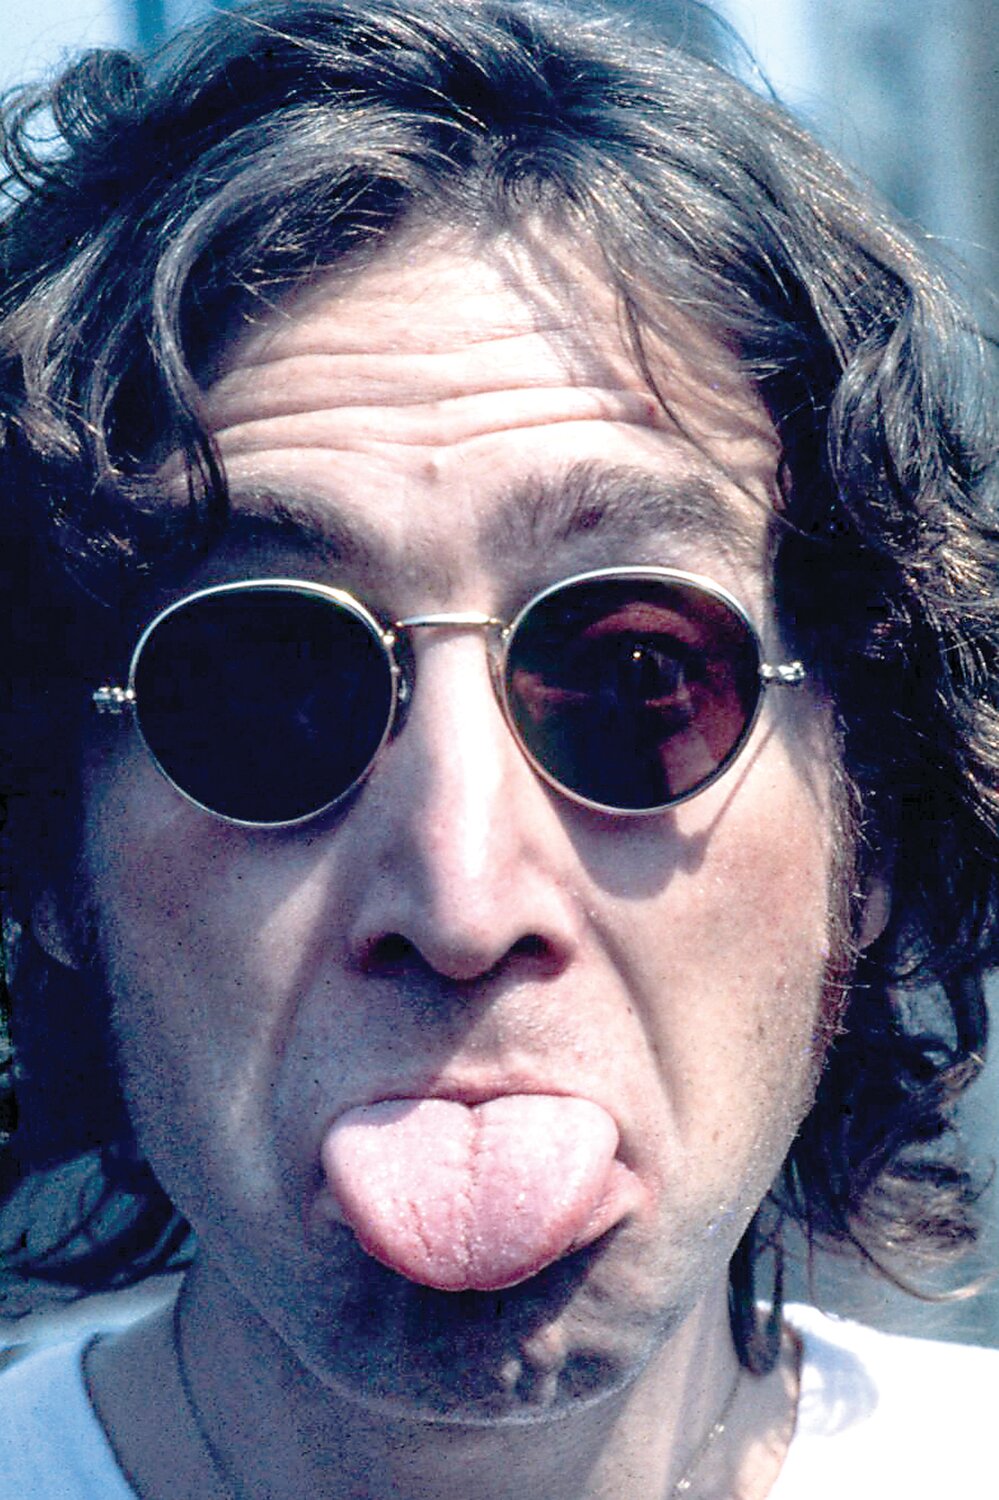 John Lennon’s “Social Commentary” in a photograph by May Pang.